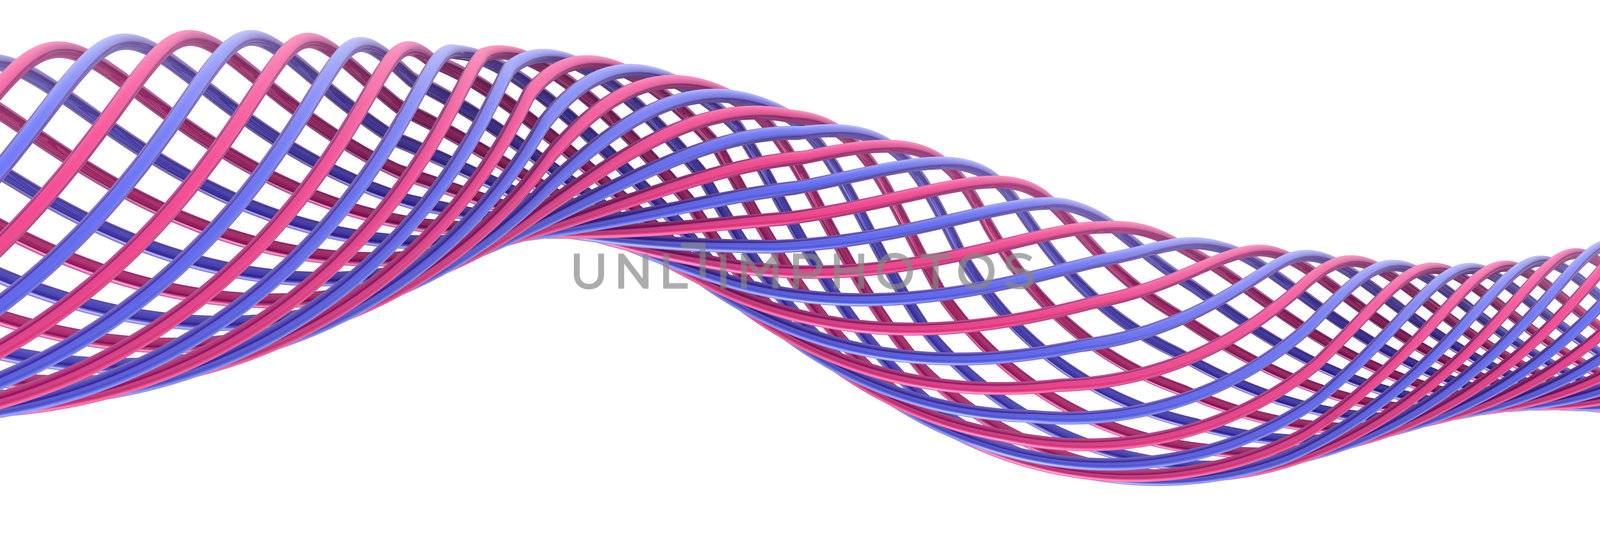 Blue and red 3d spiral isolated on the white background